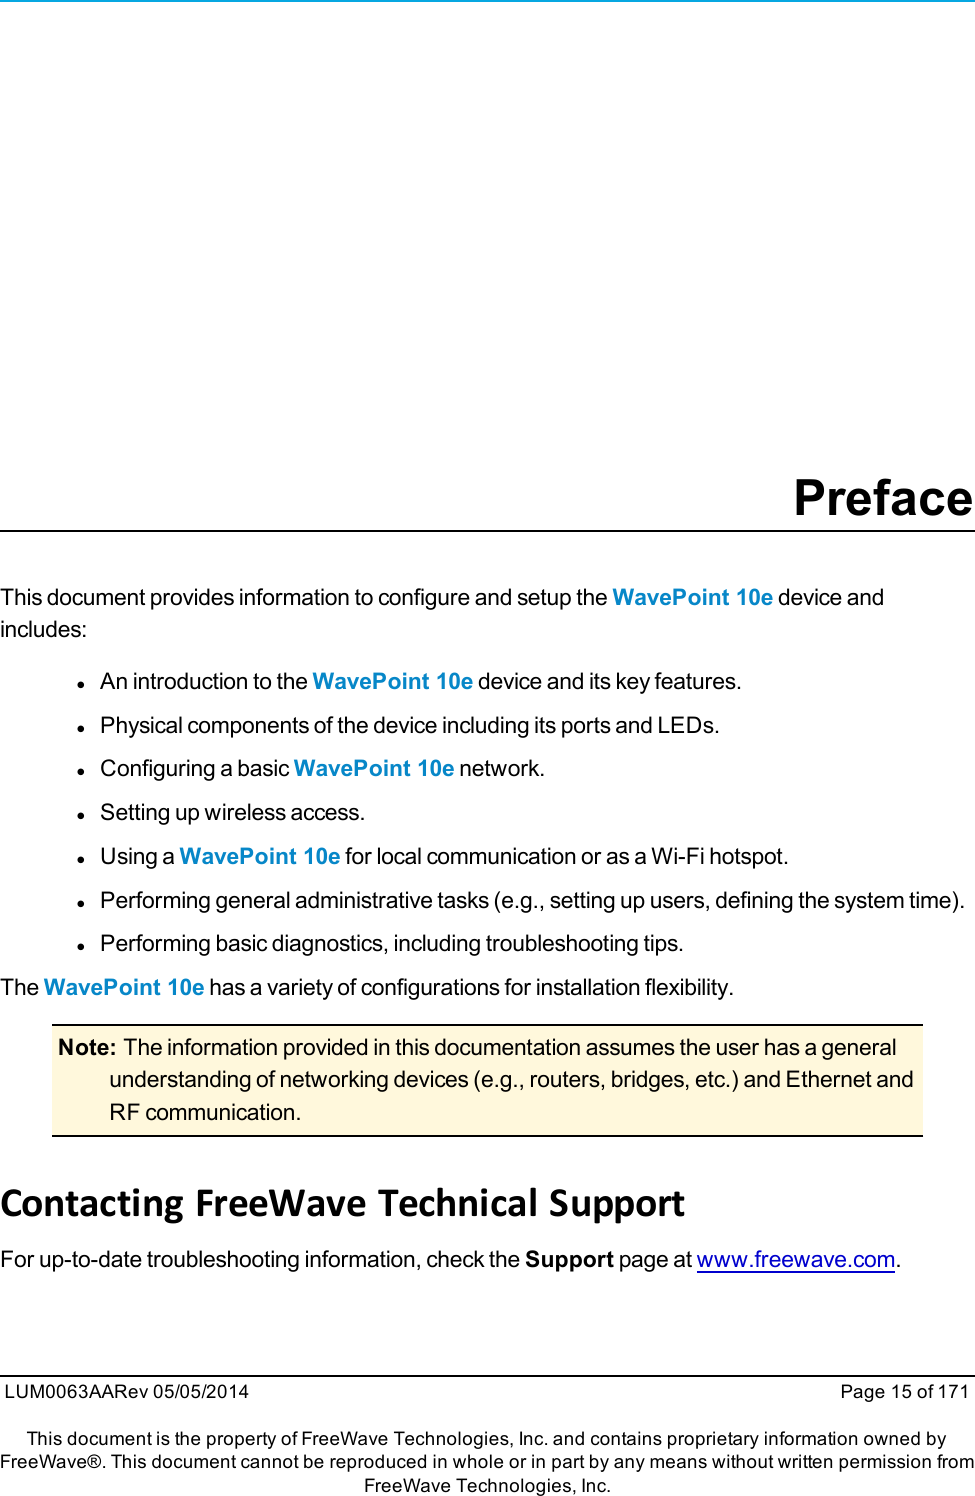 PrefaceThis document provides information to configure and setup the WavePoint 10e device andincludes:lAn introduction to the WavePoint 10e device and its key features.lPhysical components of the device including its ports and LEDs.lConfiguring a basic WavePoint 10e network.lSetting up wireless access.lUsing a WavePoint 10e for local communication or as a Wi-Fi hotspot.lPerforming general administrative tasks (e.g., setting up users, defining the system time).lPerforming basic diagnostics, including troubleshooting tips.The WavePoint 10e has a variety of configurations for installation flexibility.Note: The information provided in this documentation assumes the user has a generalunderstanding of networking devices (e.g., routers, bridges, etc.) and Ethernet andRF communication.Contacting FreeWave Technical SupportFor up-to-date troubleshooting information, check the Support page at www.freewave.com.LUM0063AARev 05/05/2014 Page 15 of 171This document is the property of FreeWave Technologies, Inc. and contains proprietary information owned byFreeWave®. This document cannot be reproduced in whole or in part by any means without written permission fromFreeWave Technologies, Inc.